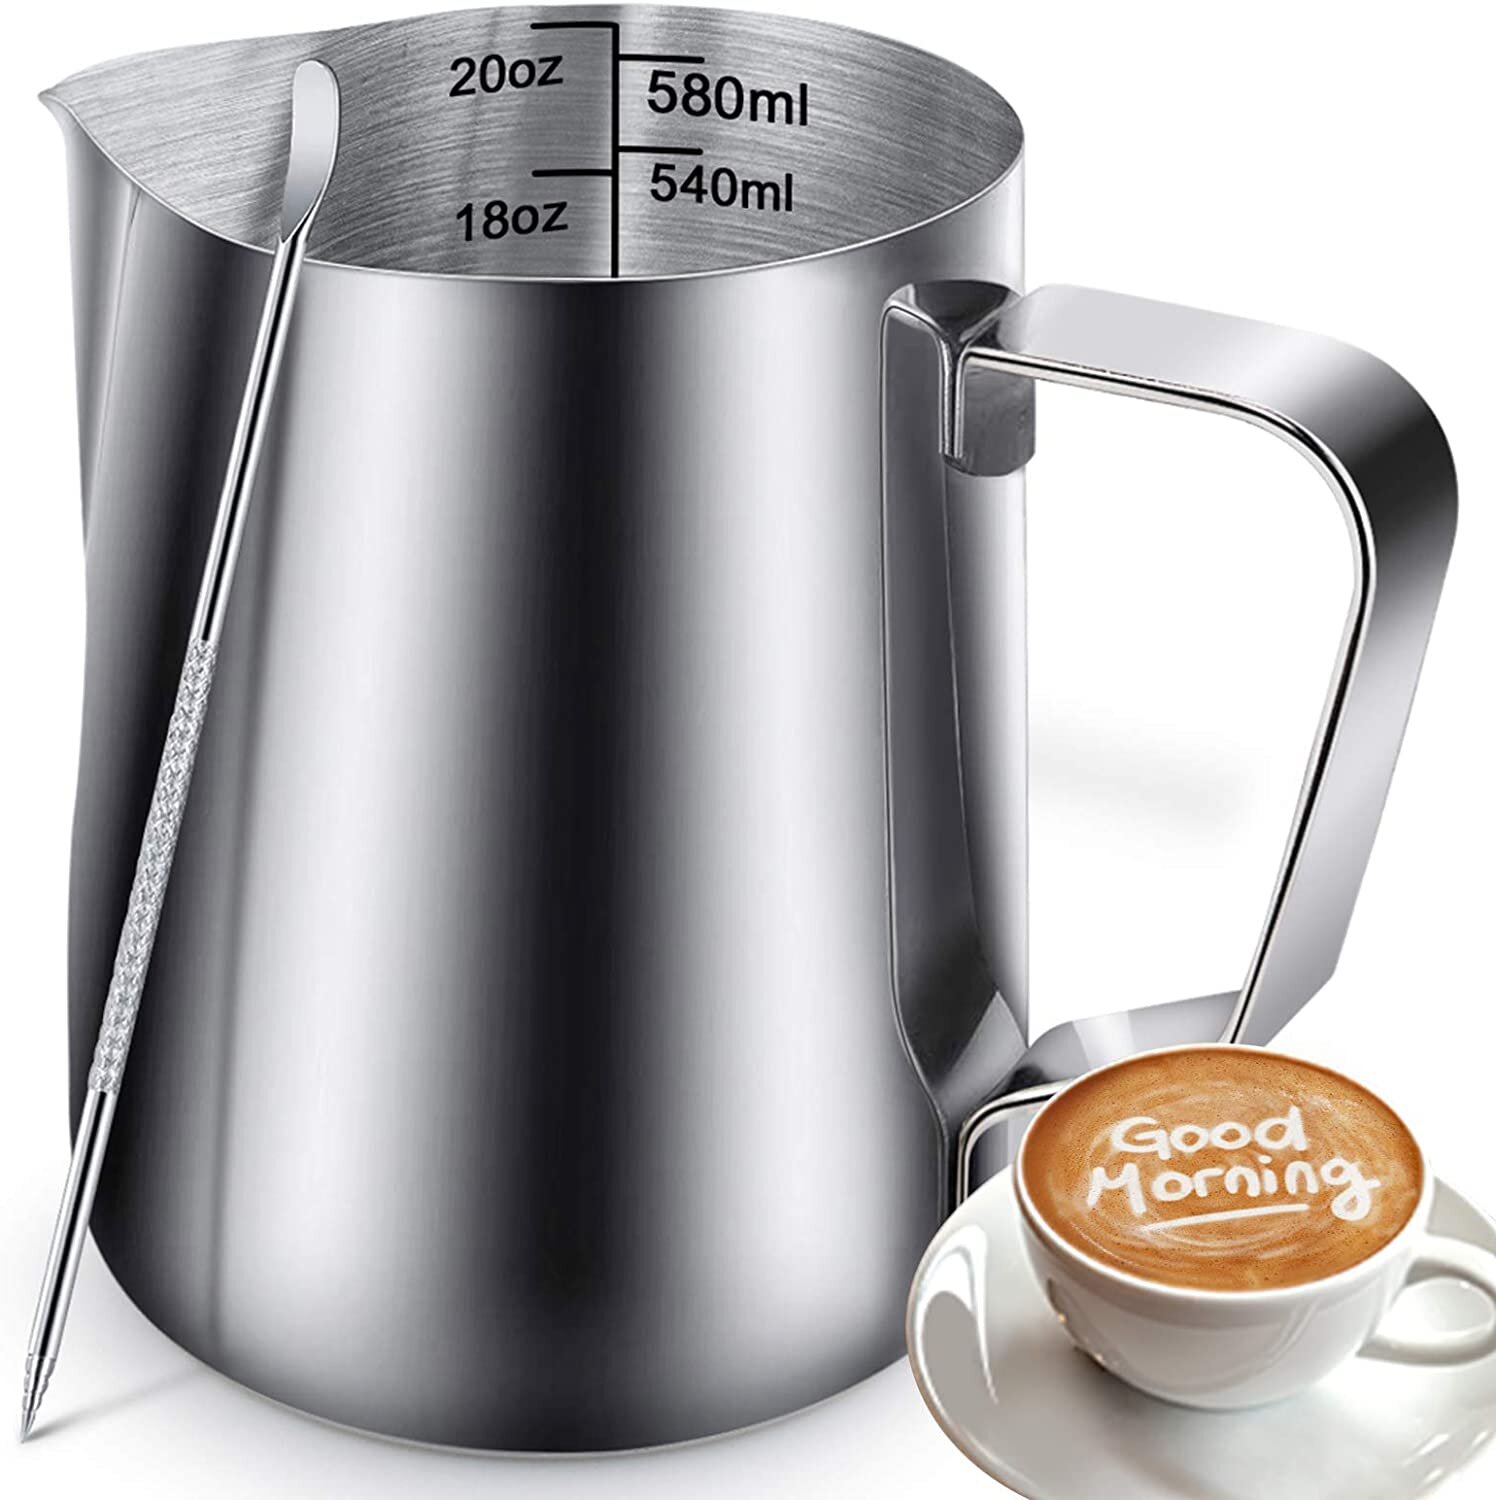 4 Size Stainless Steel Coffee Pitcher Mug Frothing Milk Latte Jug Foam Cup 